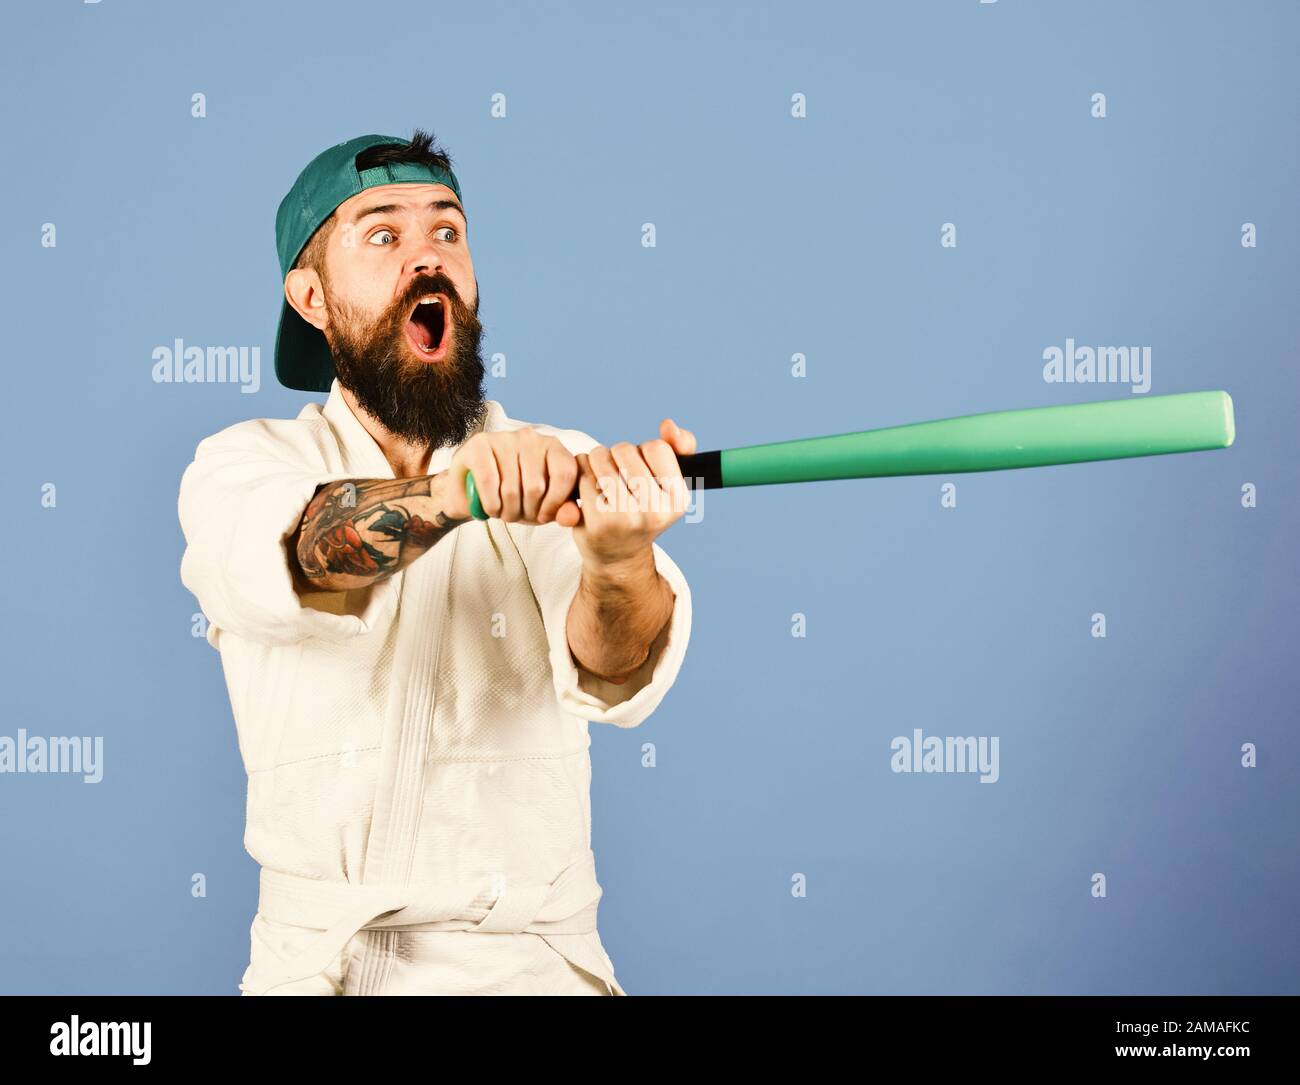 Man with beard in white and green on blue background. Martial arts Baseball player with shocked face holds green baseball bat. Master gets ready to fight Stock Photo -